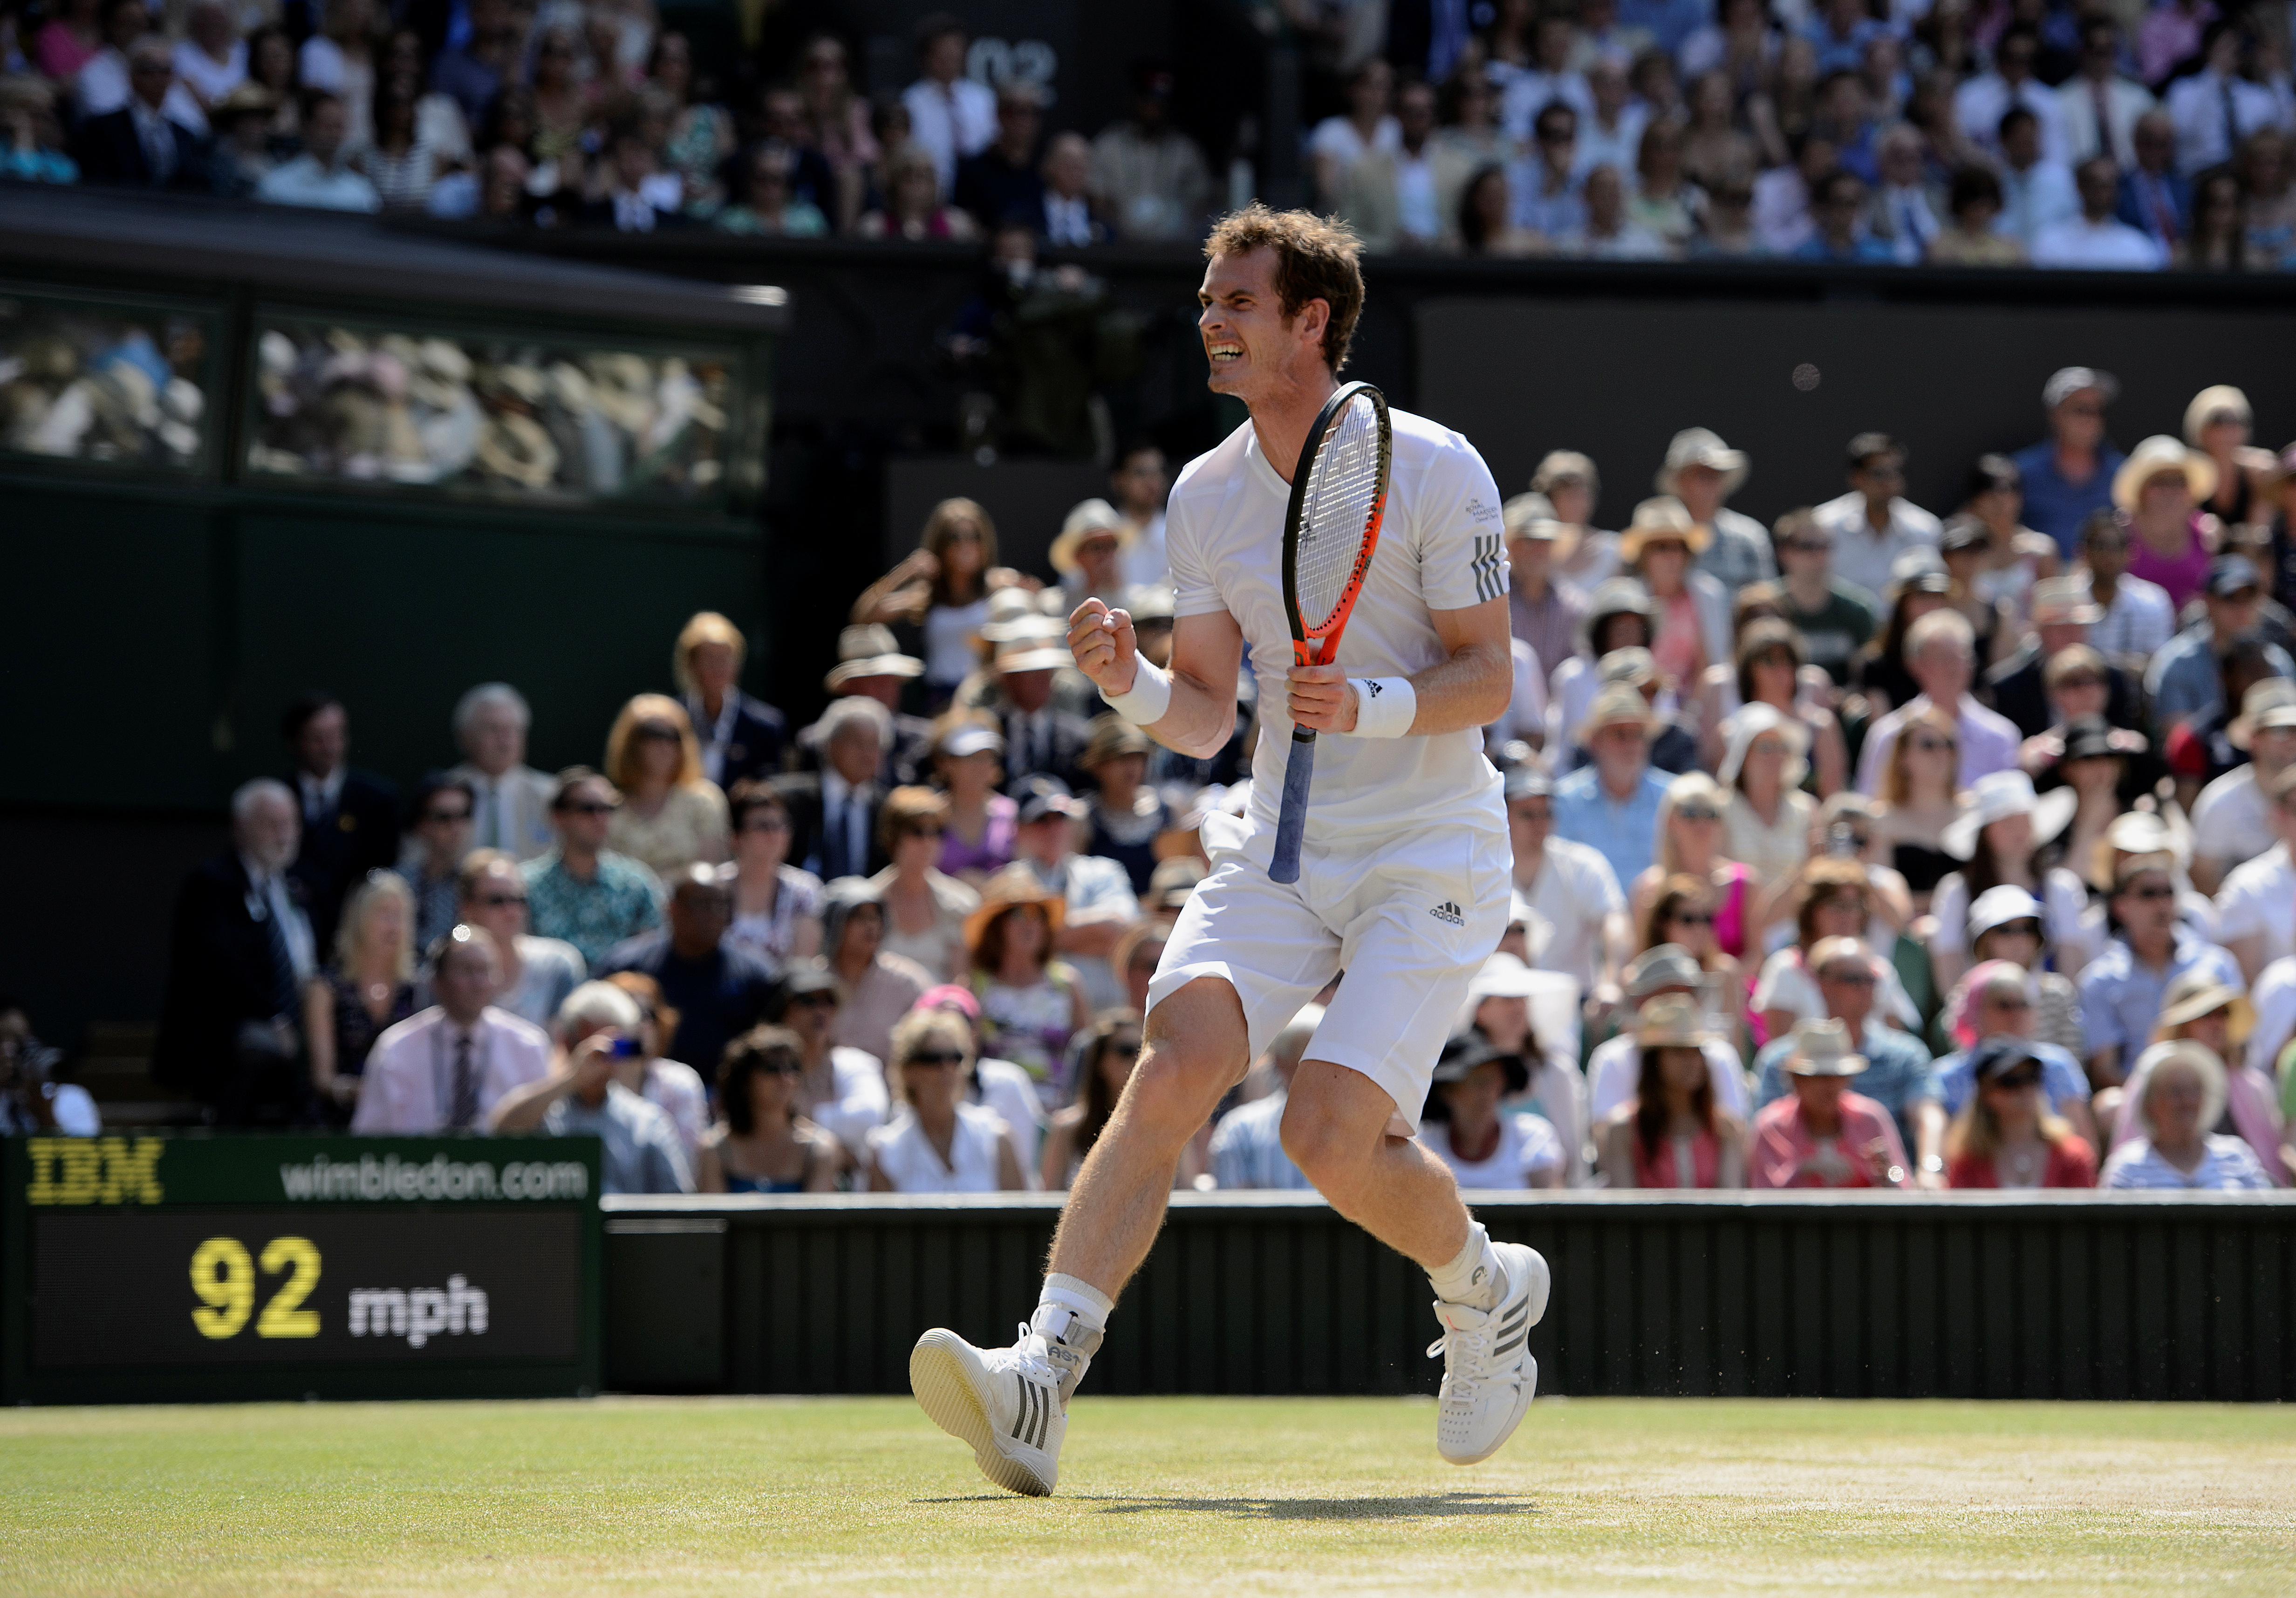 Andy Murray of Britain plays against Novak Djokovic of Serbia in the Men's Singles Final on centre court at the 2013 Wimbledon Championships tennis tournament in London, Britain, July 7, 2013. AELTC/Matthias Hangst/via REUTERS